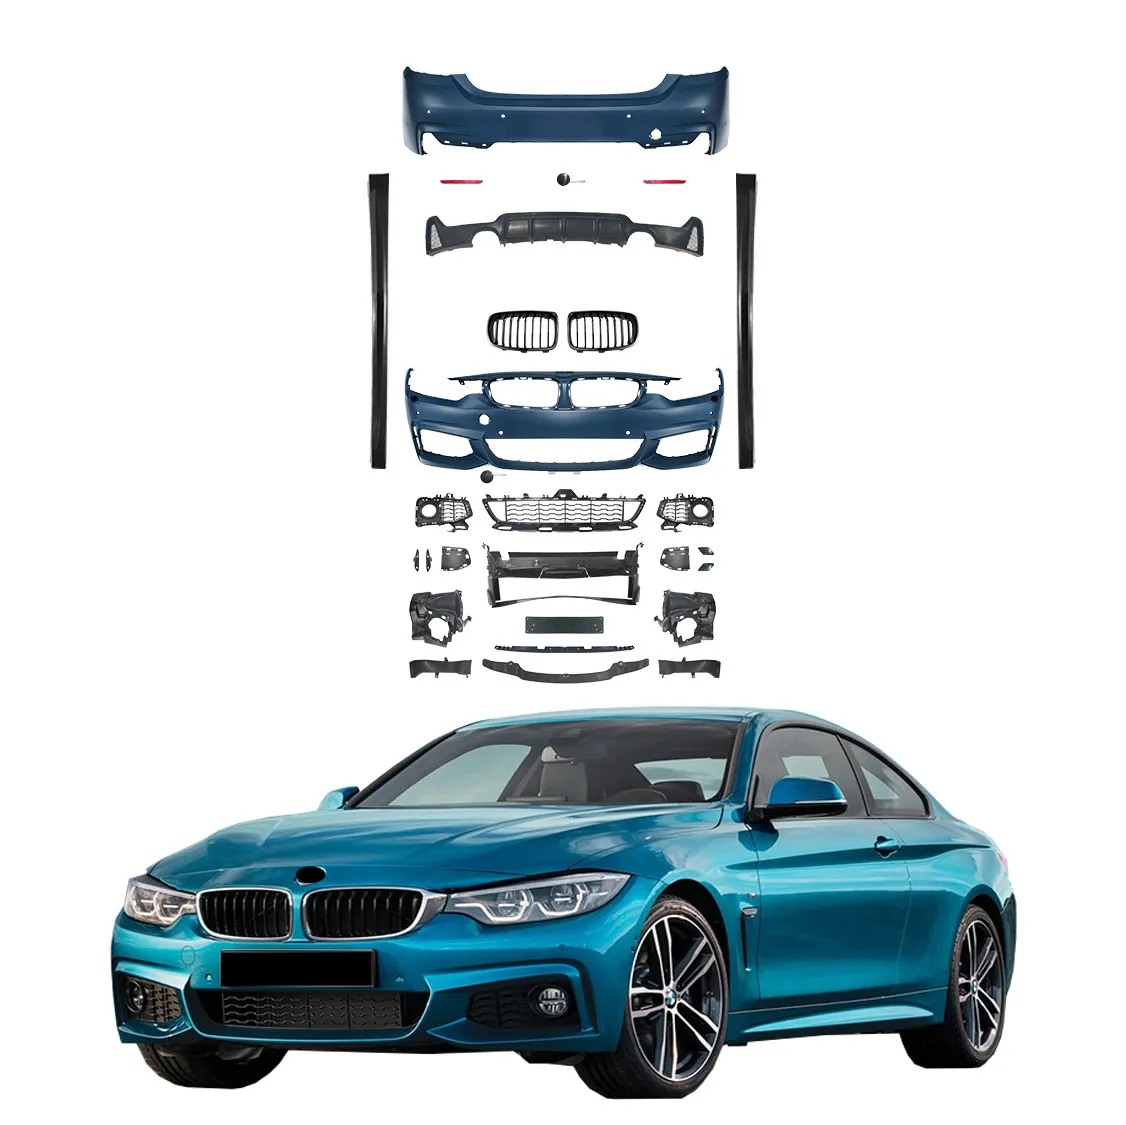 For BMW 4S F32 F33 14-19 upgrade to MT model body kit include front and rear bumper assembly side skirts rear diffuser